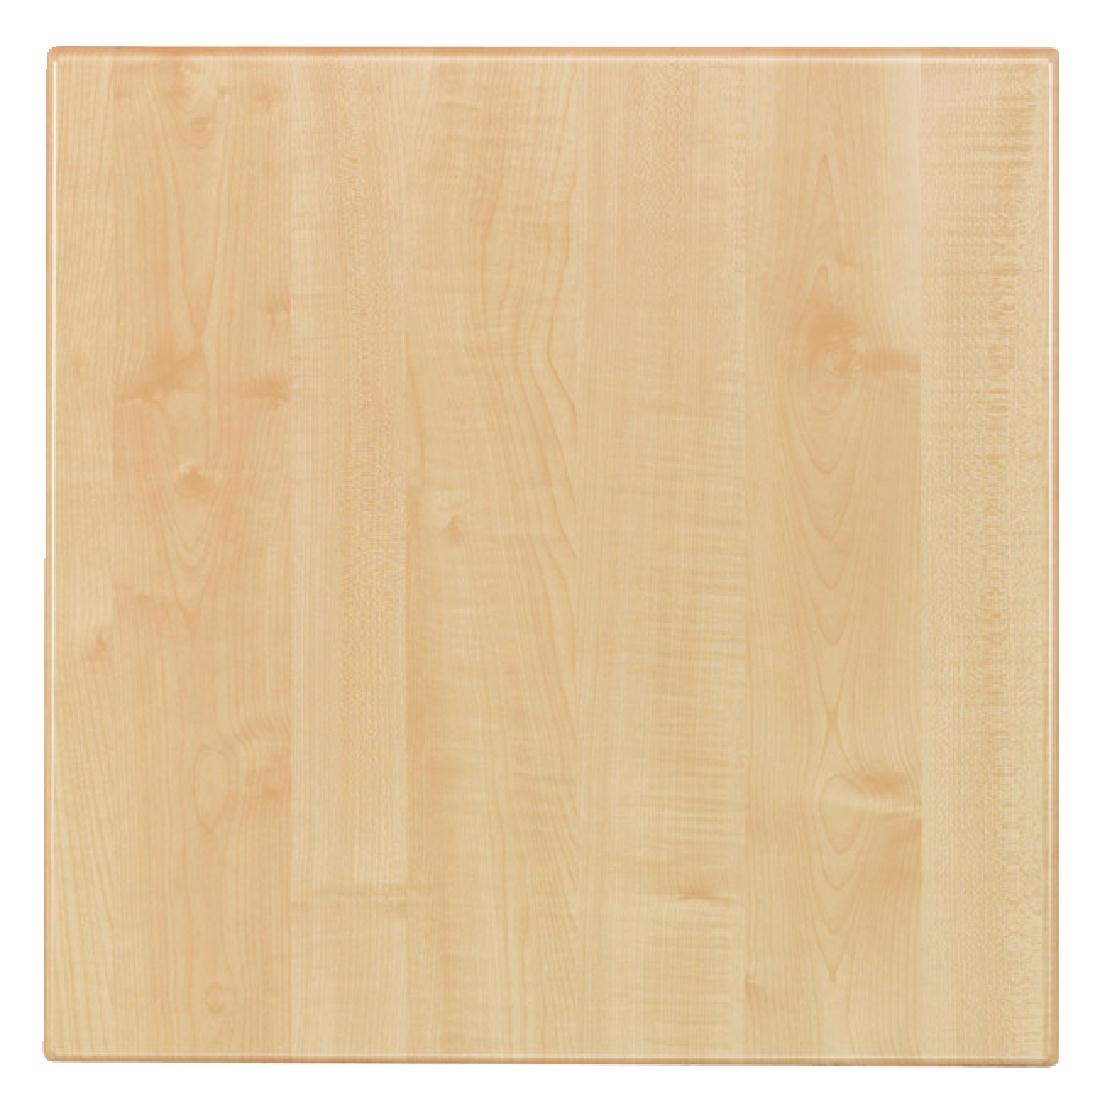 Werzalit Pre-drilled Square Table Top  Maple 600mm